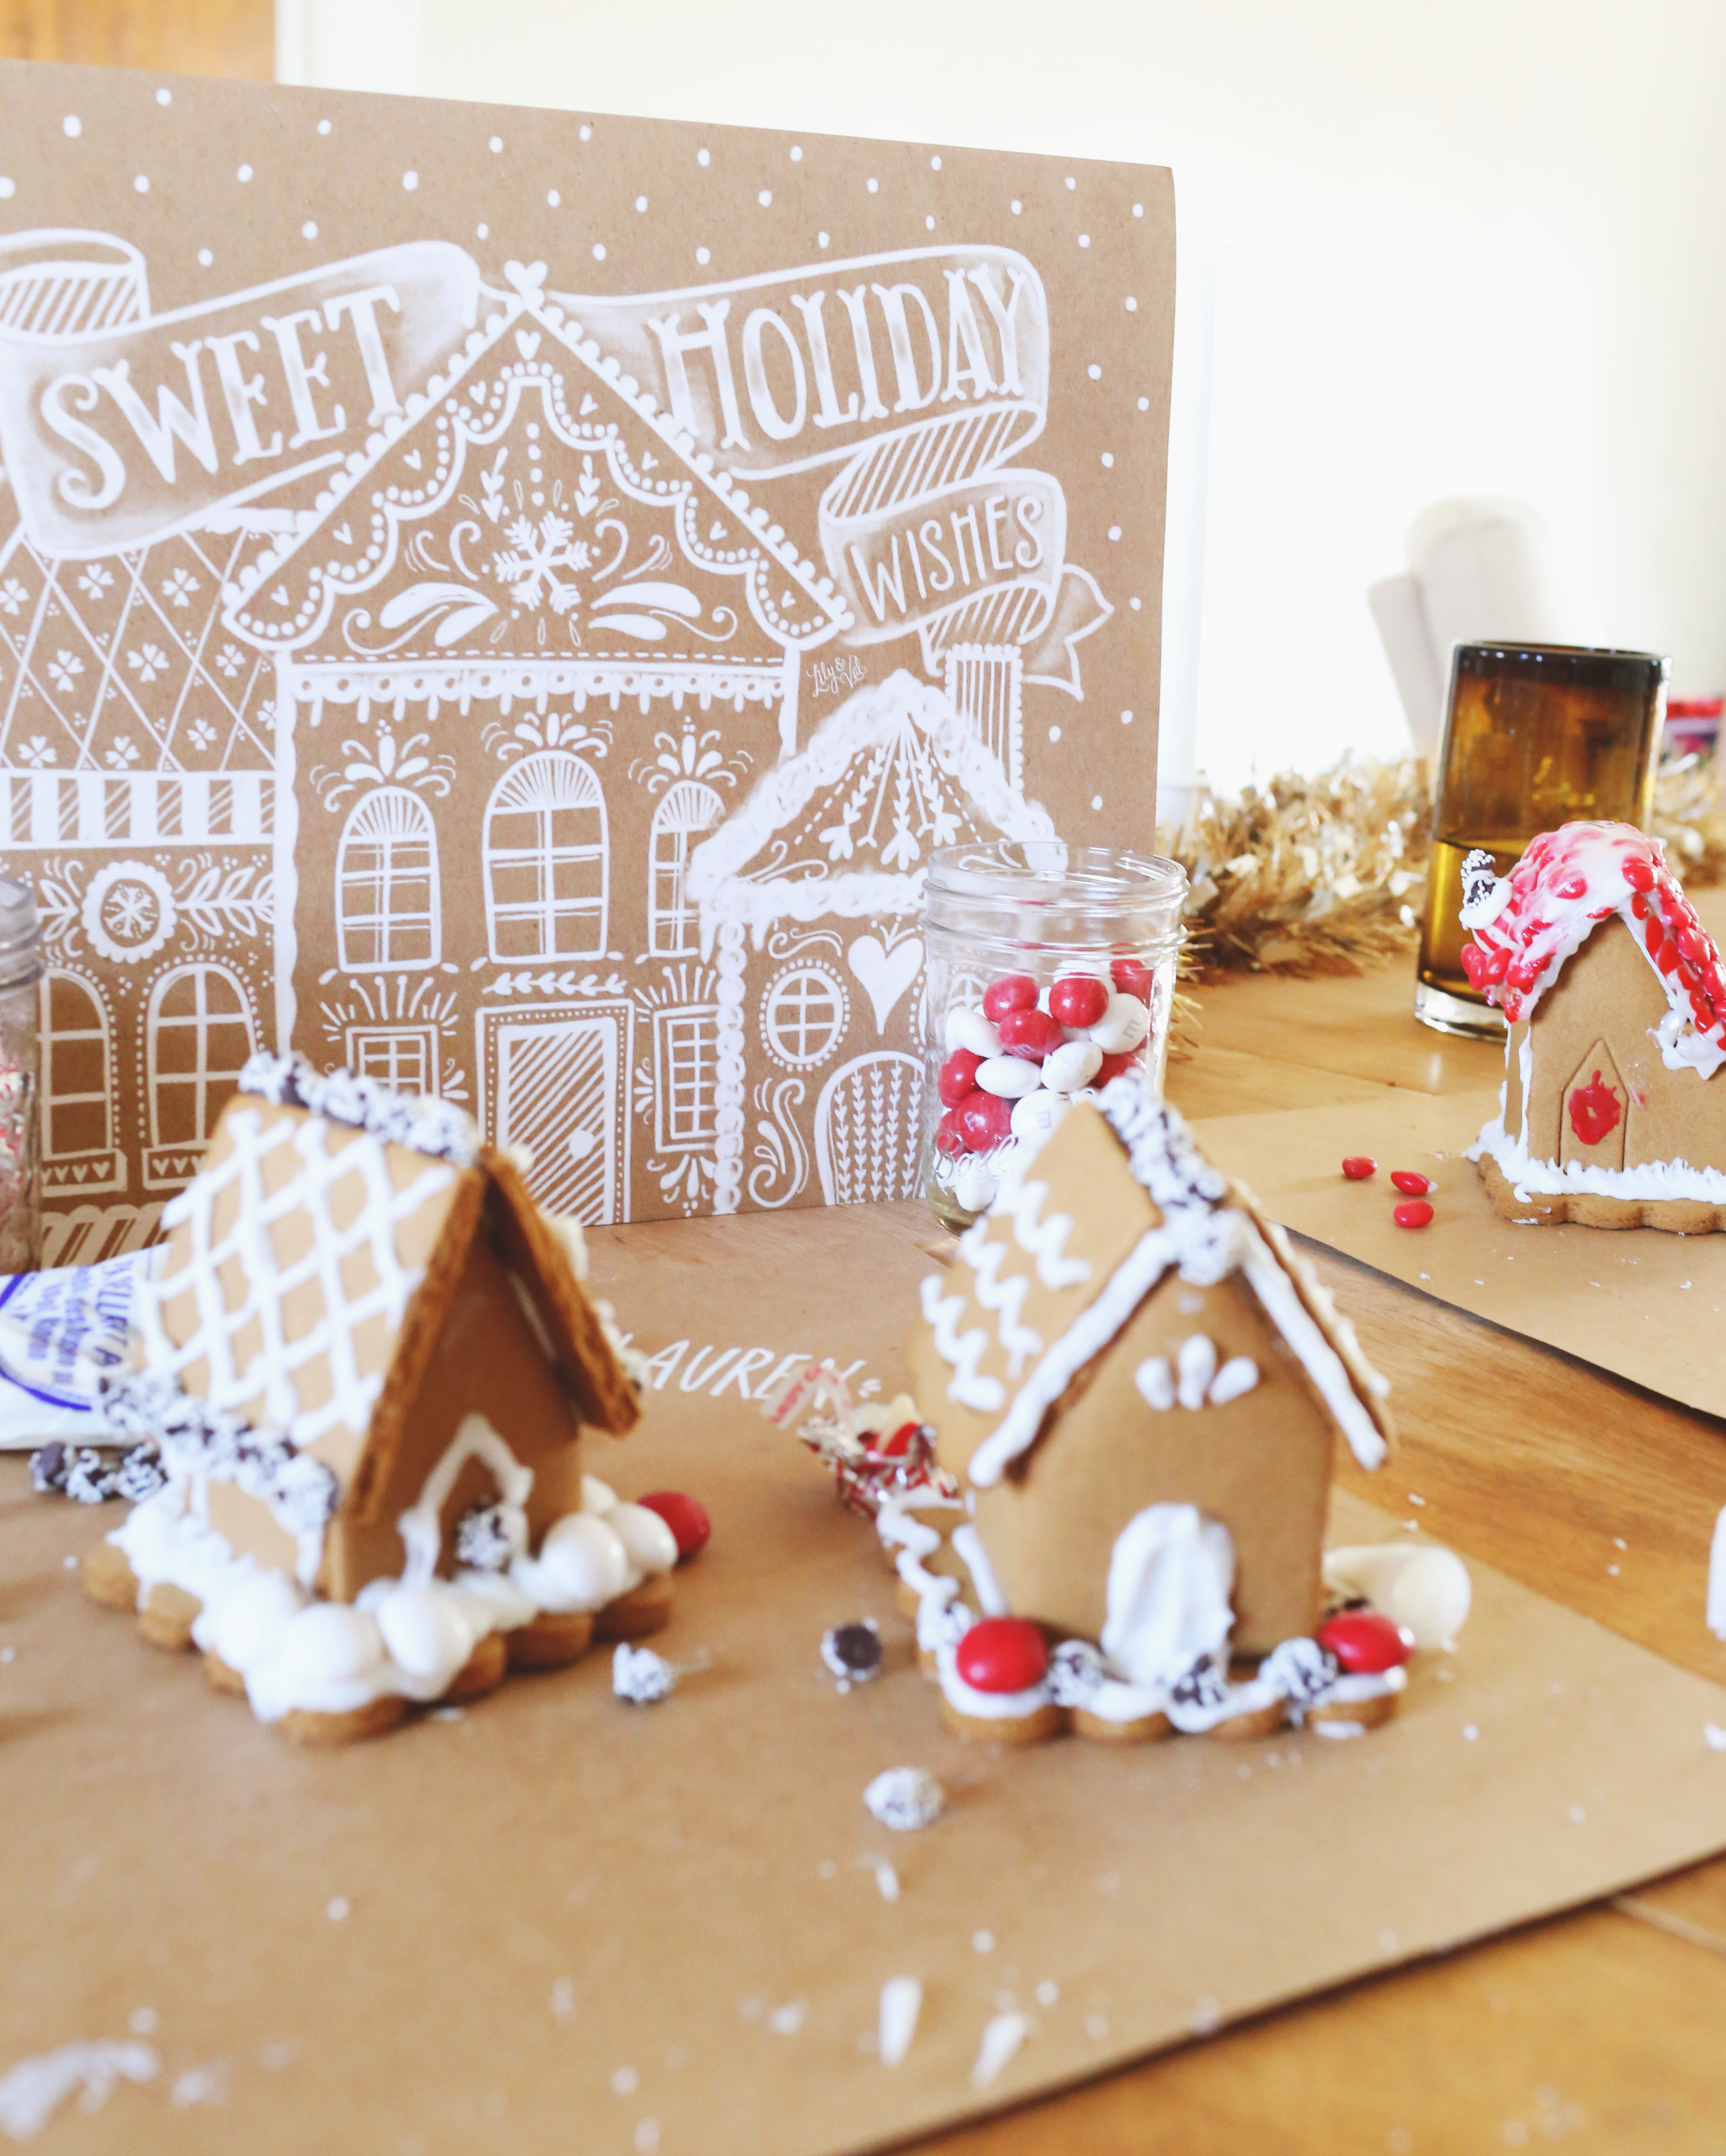 Sweet Holiday Wishes Kraft Art print by Lily & Val makes the perfect holiday decor for a gingerbread decorating party